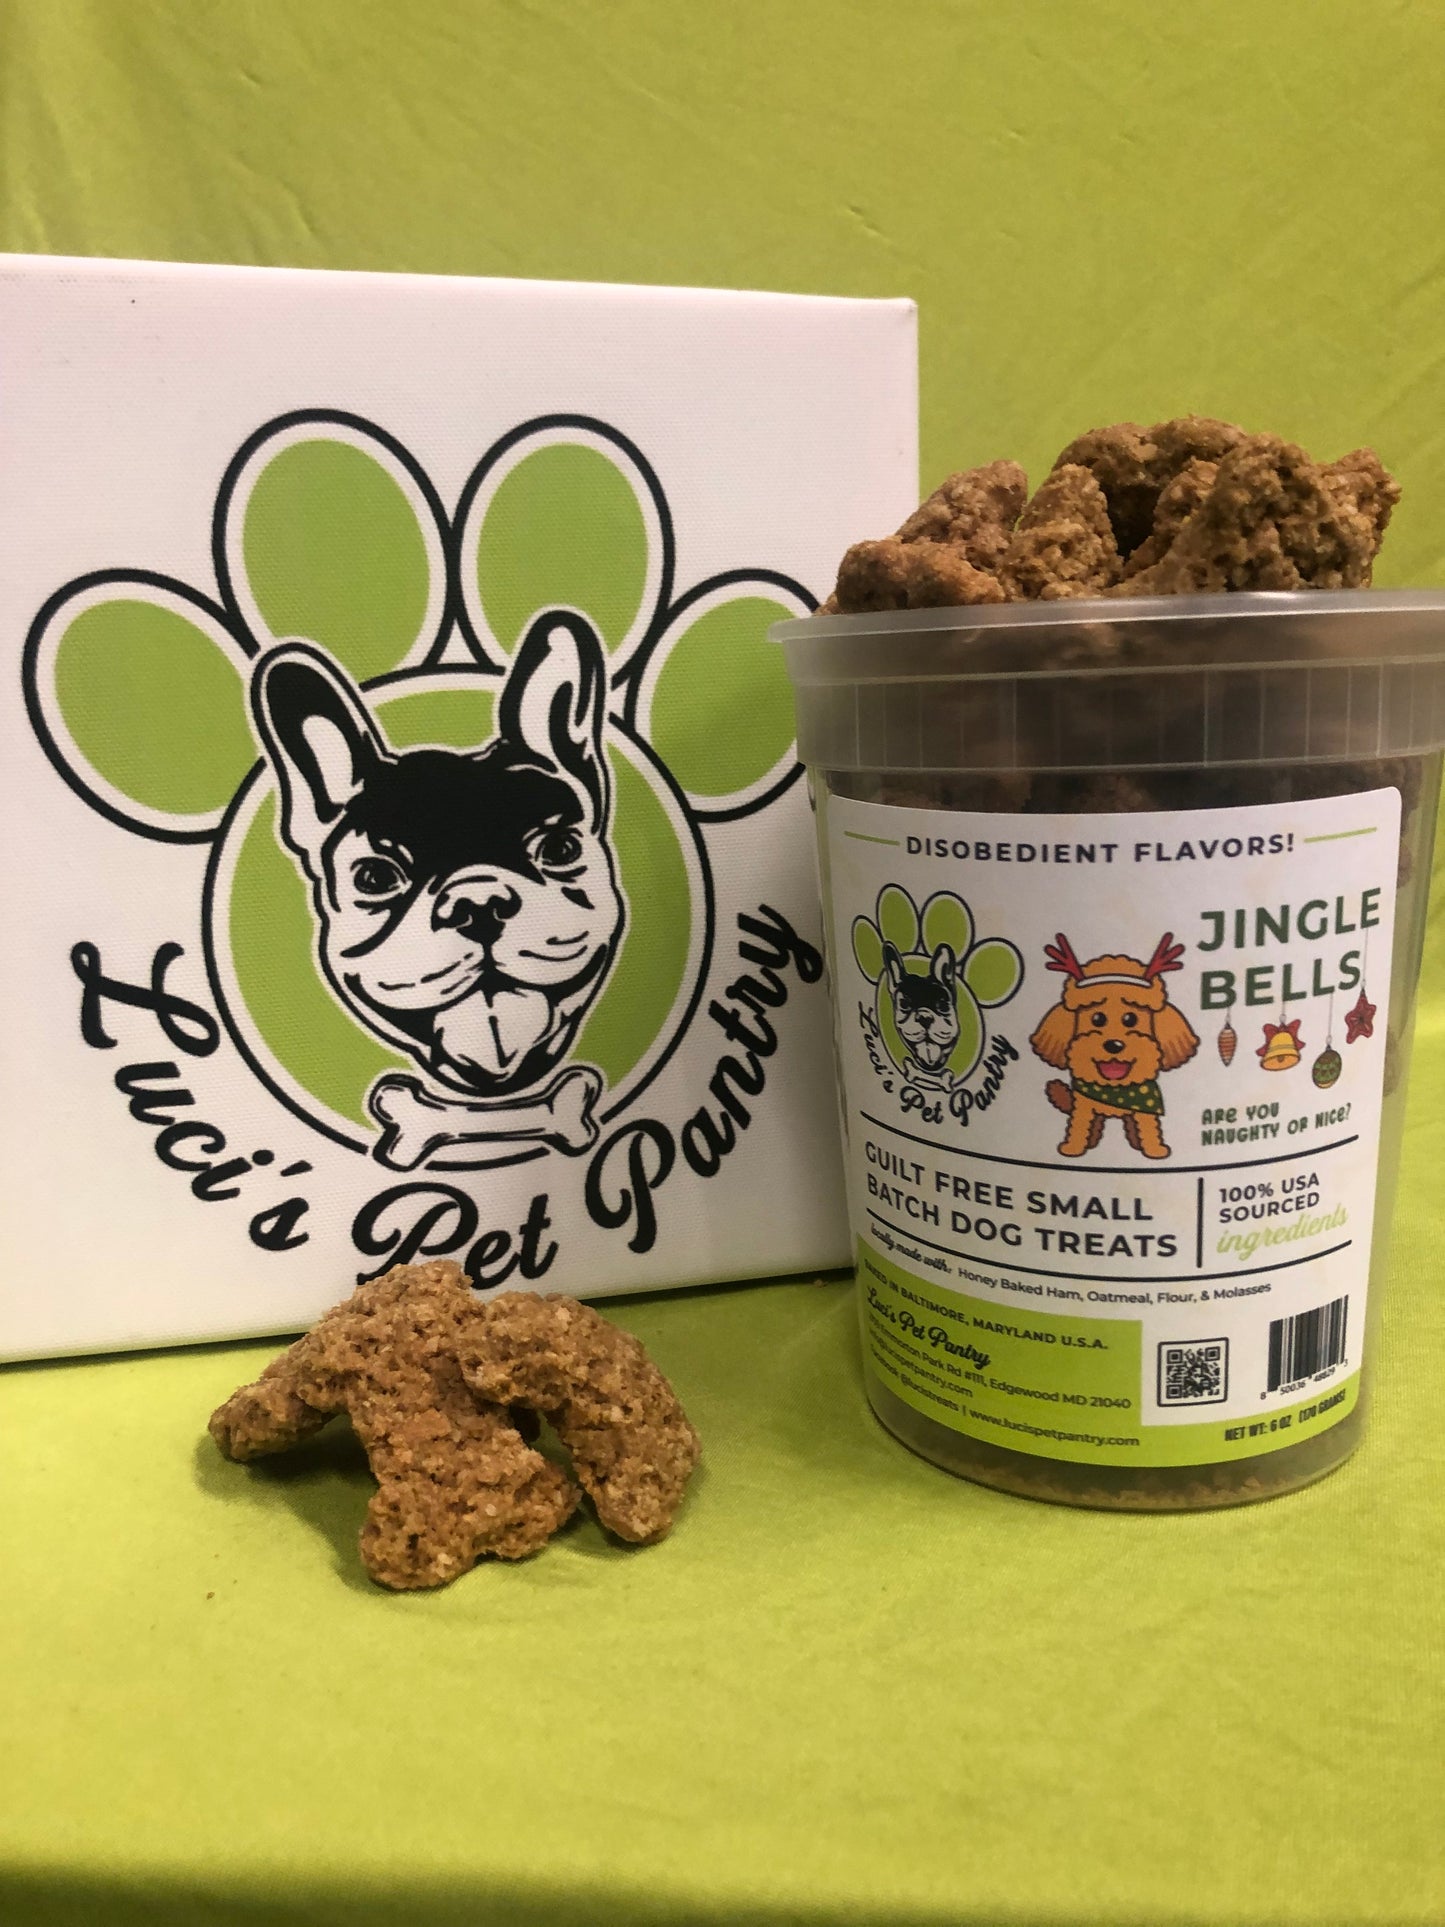 Jingle Bells - All Natural "Honey Baked Ham" Dog & Puppy Treats - Disobedient Tub of Biscuits